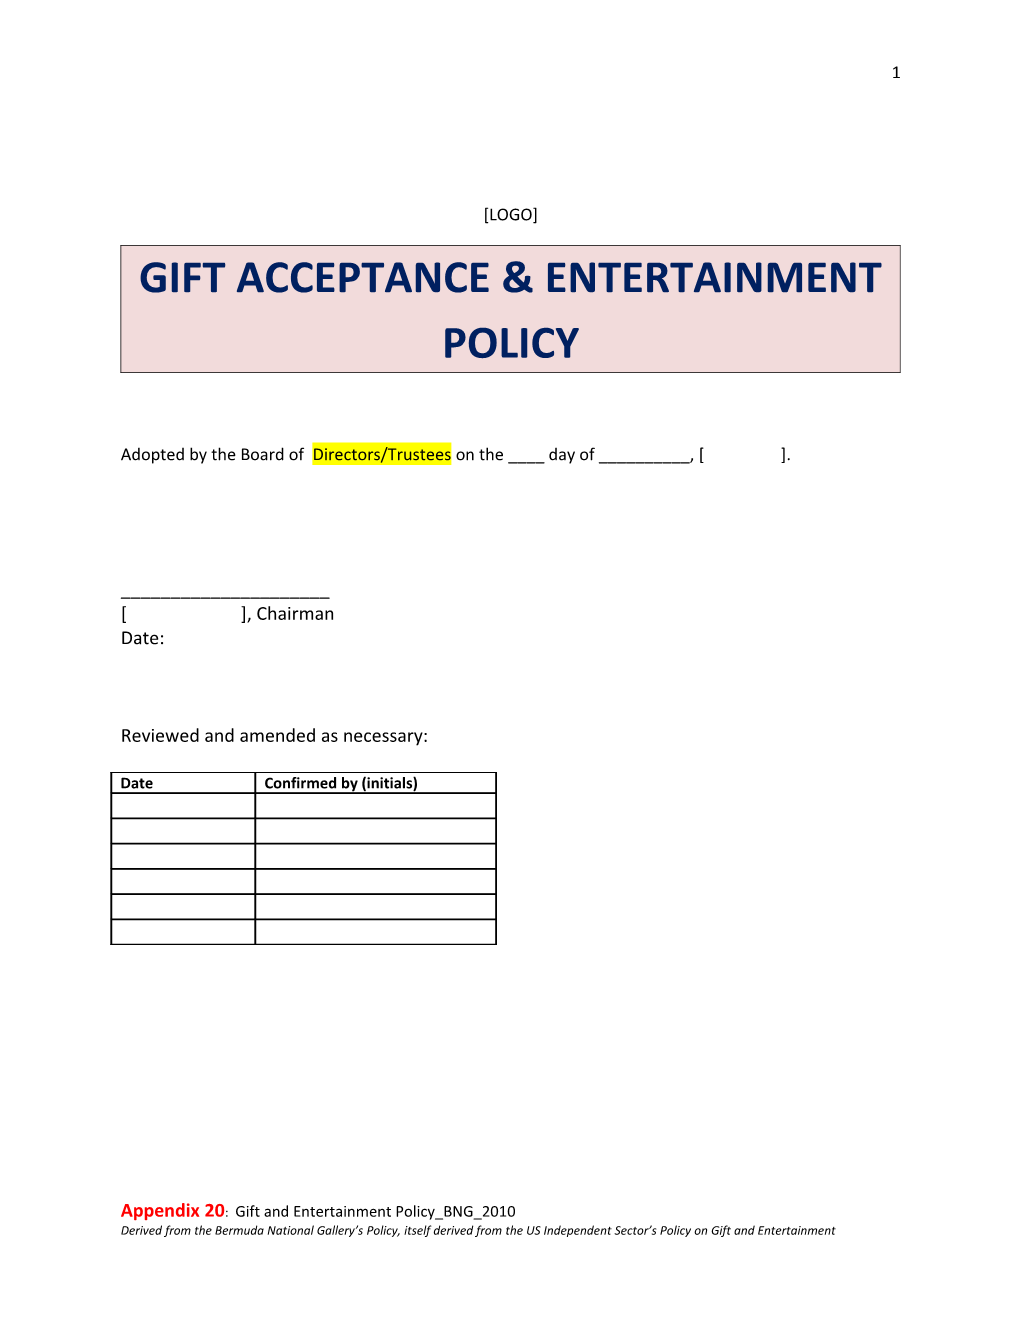 Gift Acceptance & Entertainment Policy